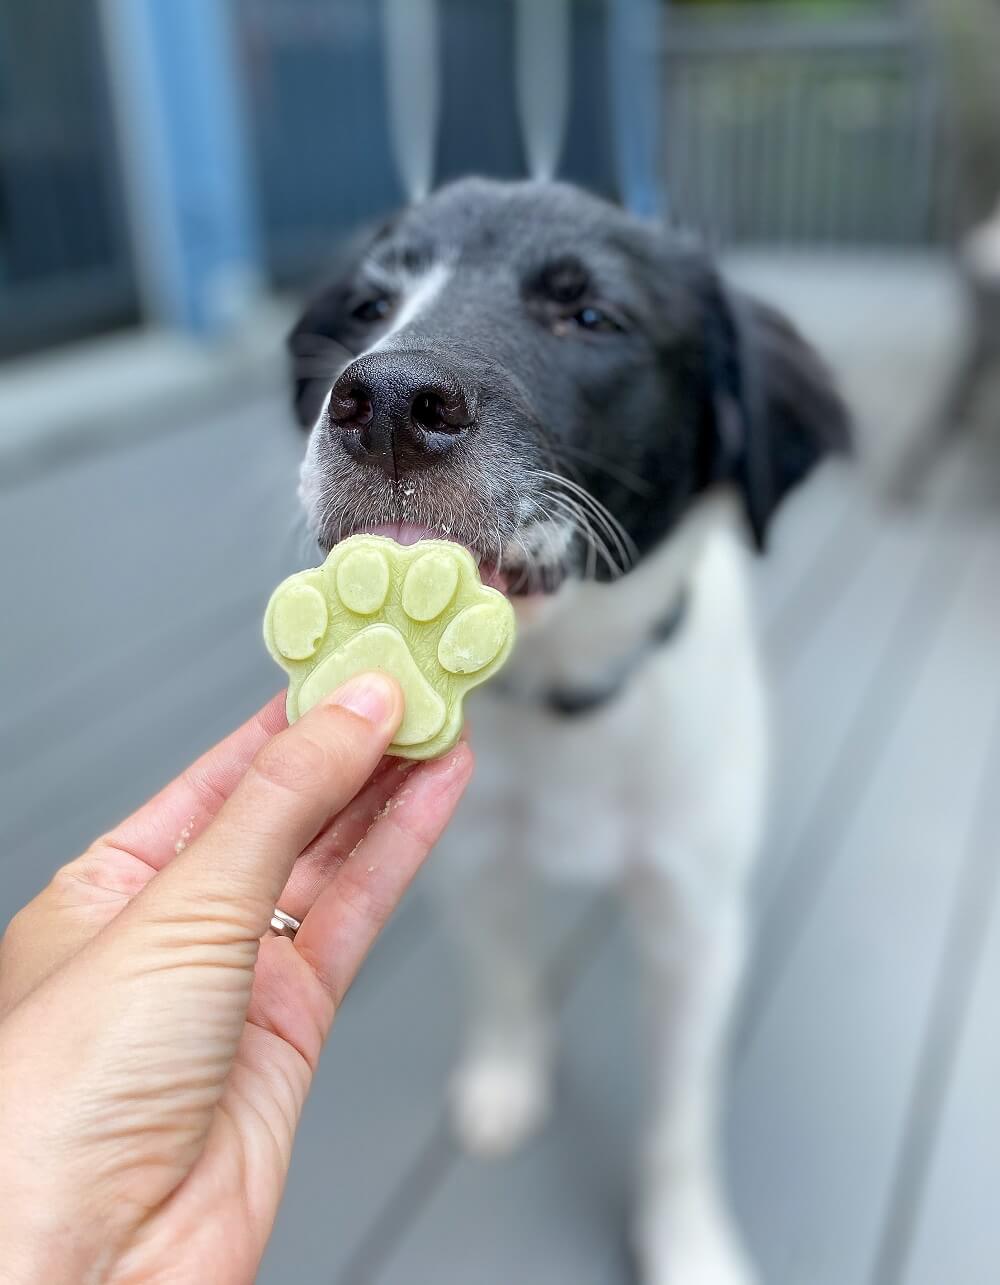 Our pups loved these celery dog treats